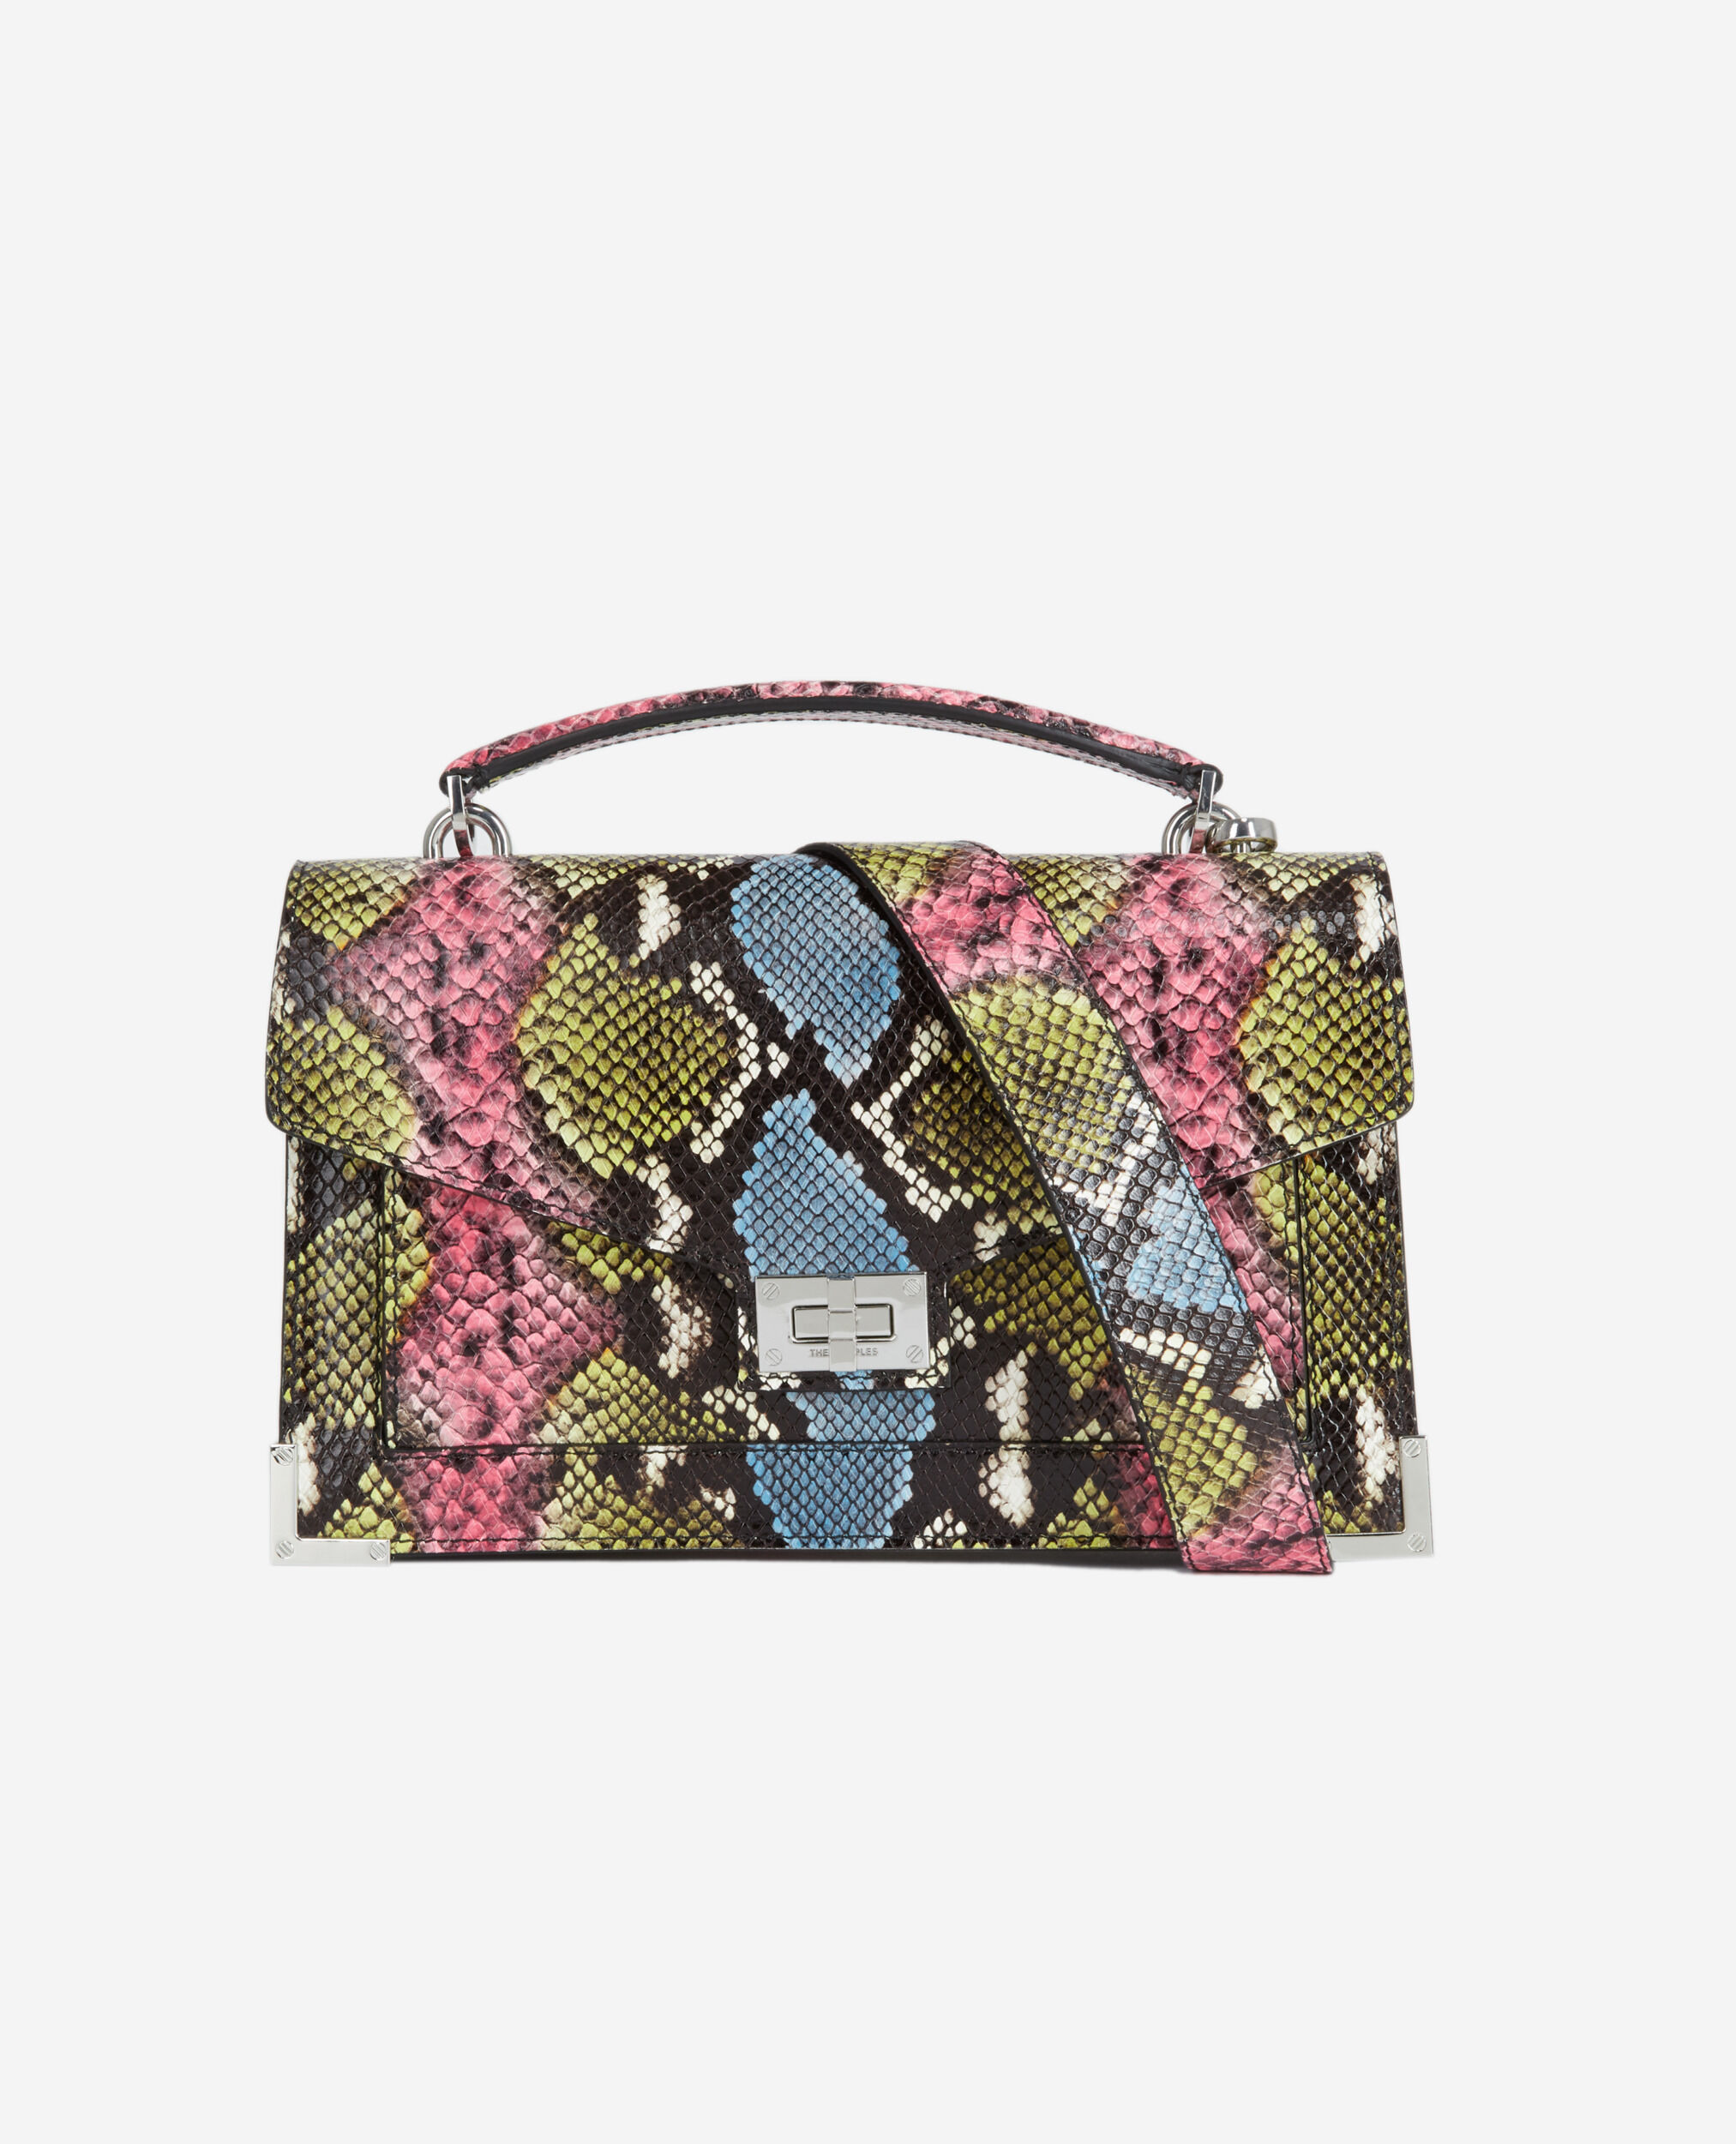 Medium Emily bag in multicolored leather, MULTICOLOR, hi-res image number null